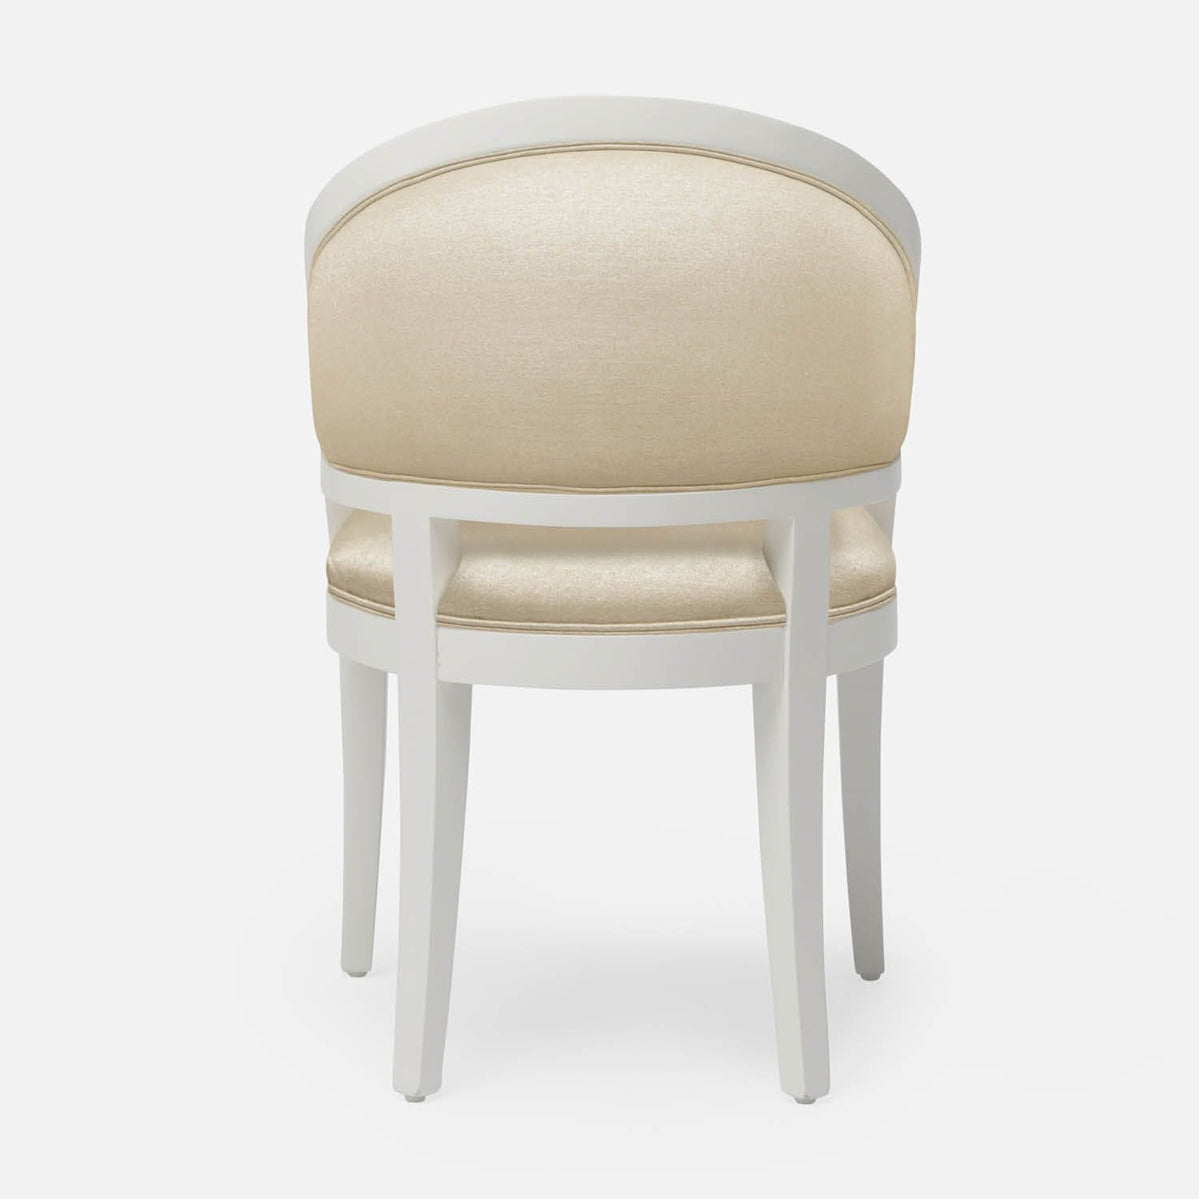 Made Goods Sylvie Curved Back Dining Chair, Humboldt Cotton Jute